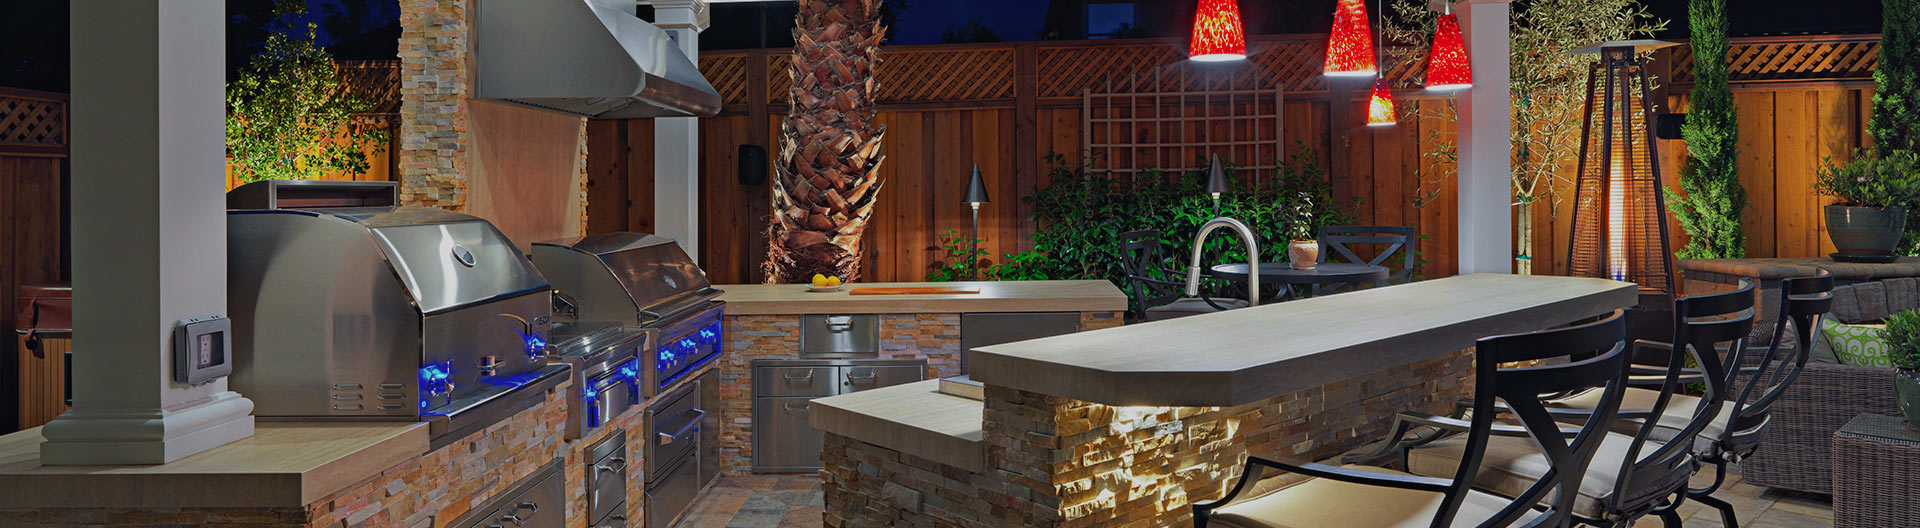 Outdoor kitchen with built-in bar, grill, sink and lighting. 